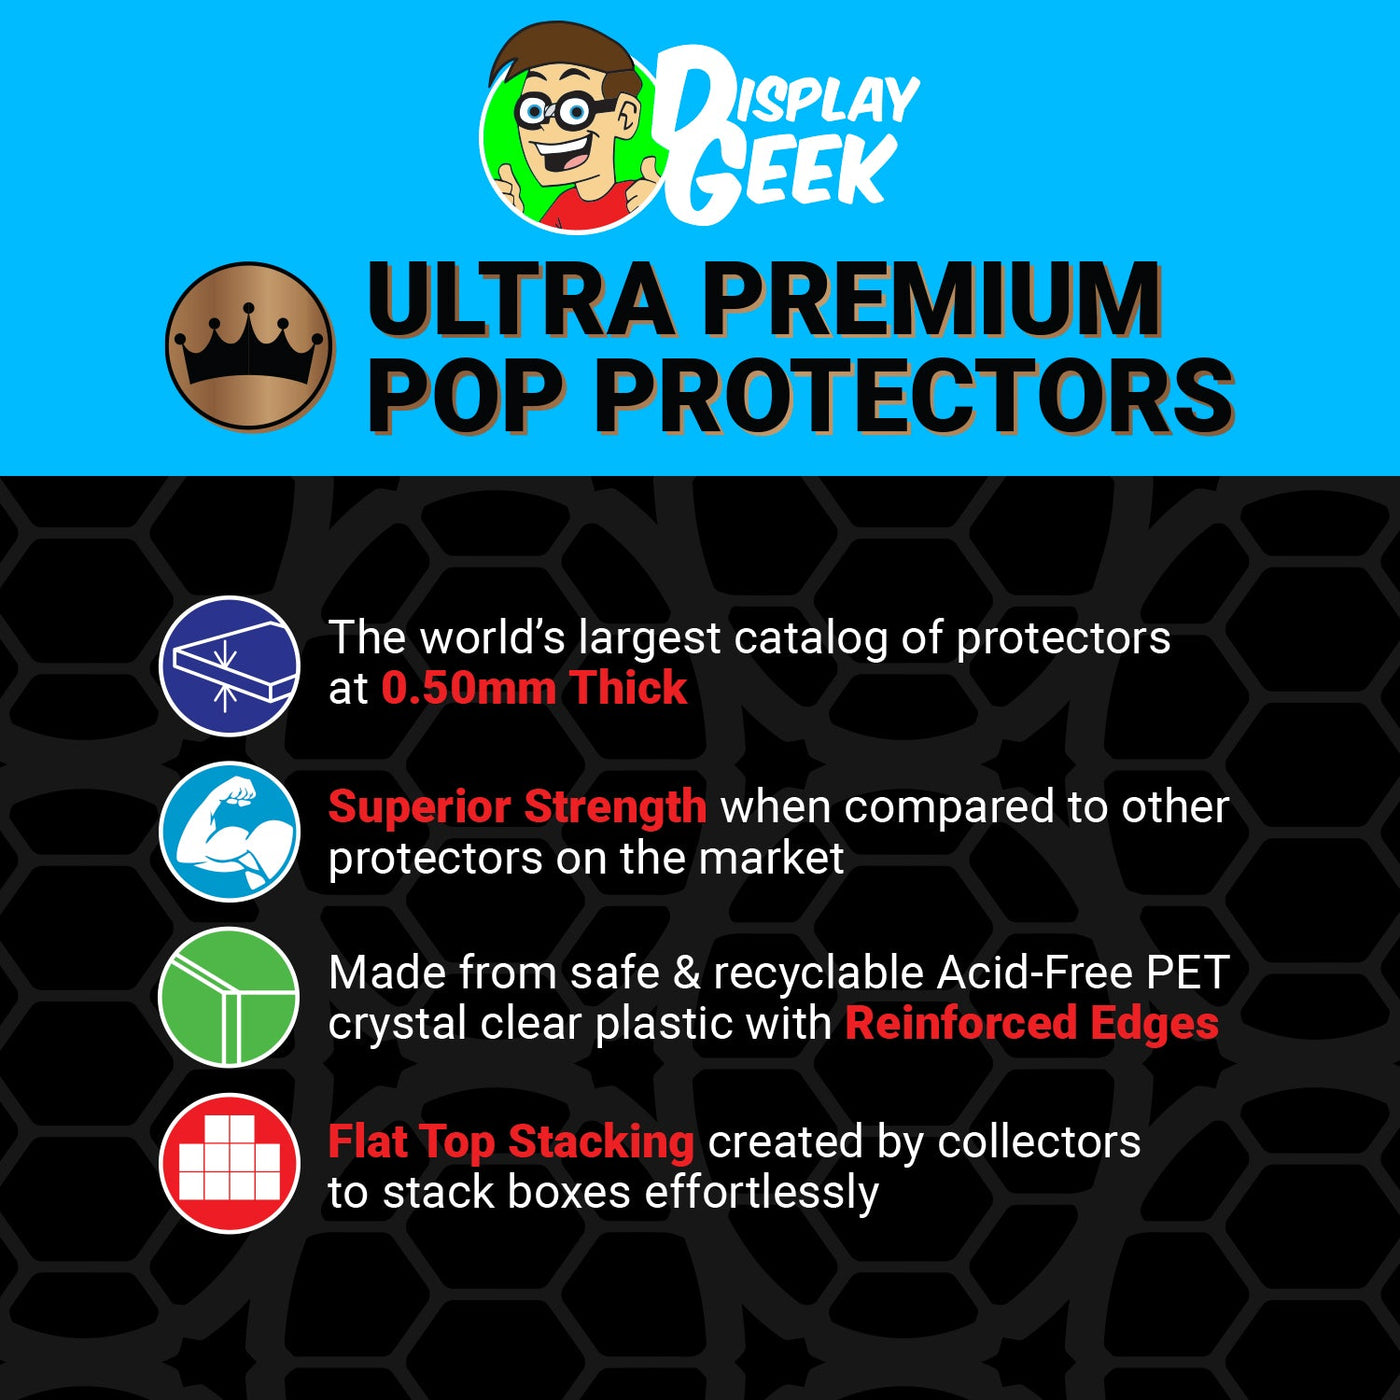 Pop Protector for Freddy Funko DIY LE 1000 on The Protector Guide App by Display Geek